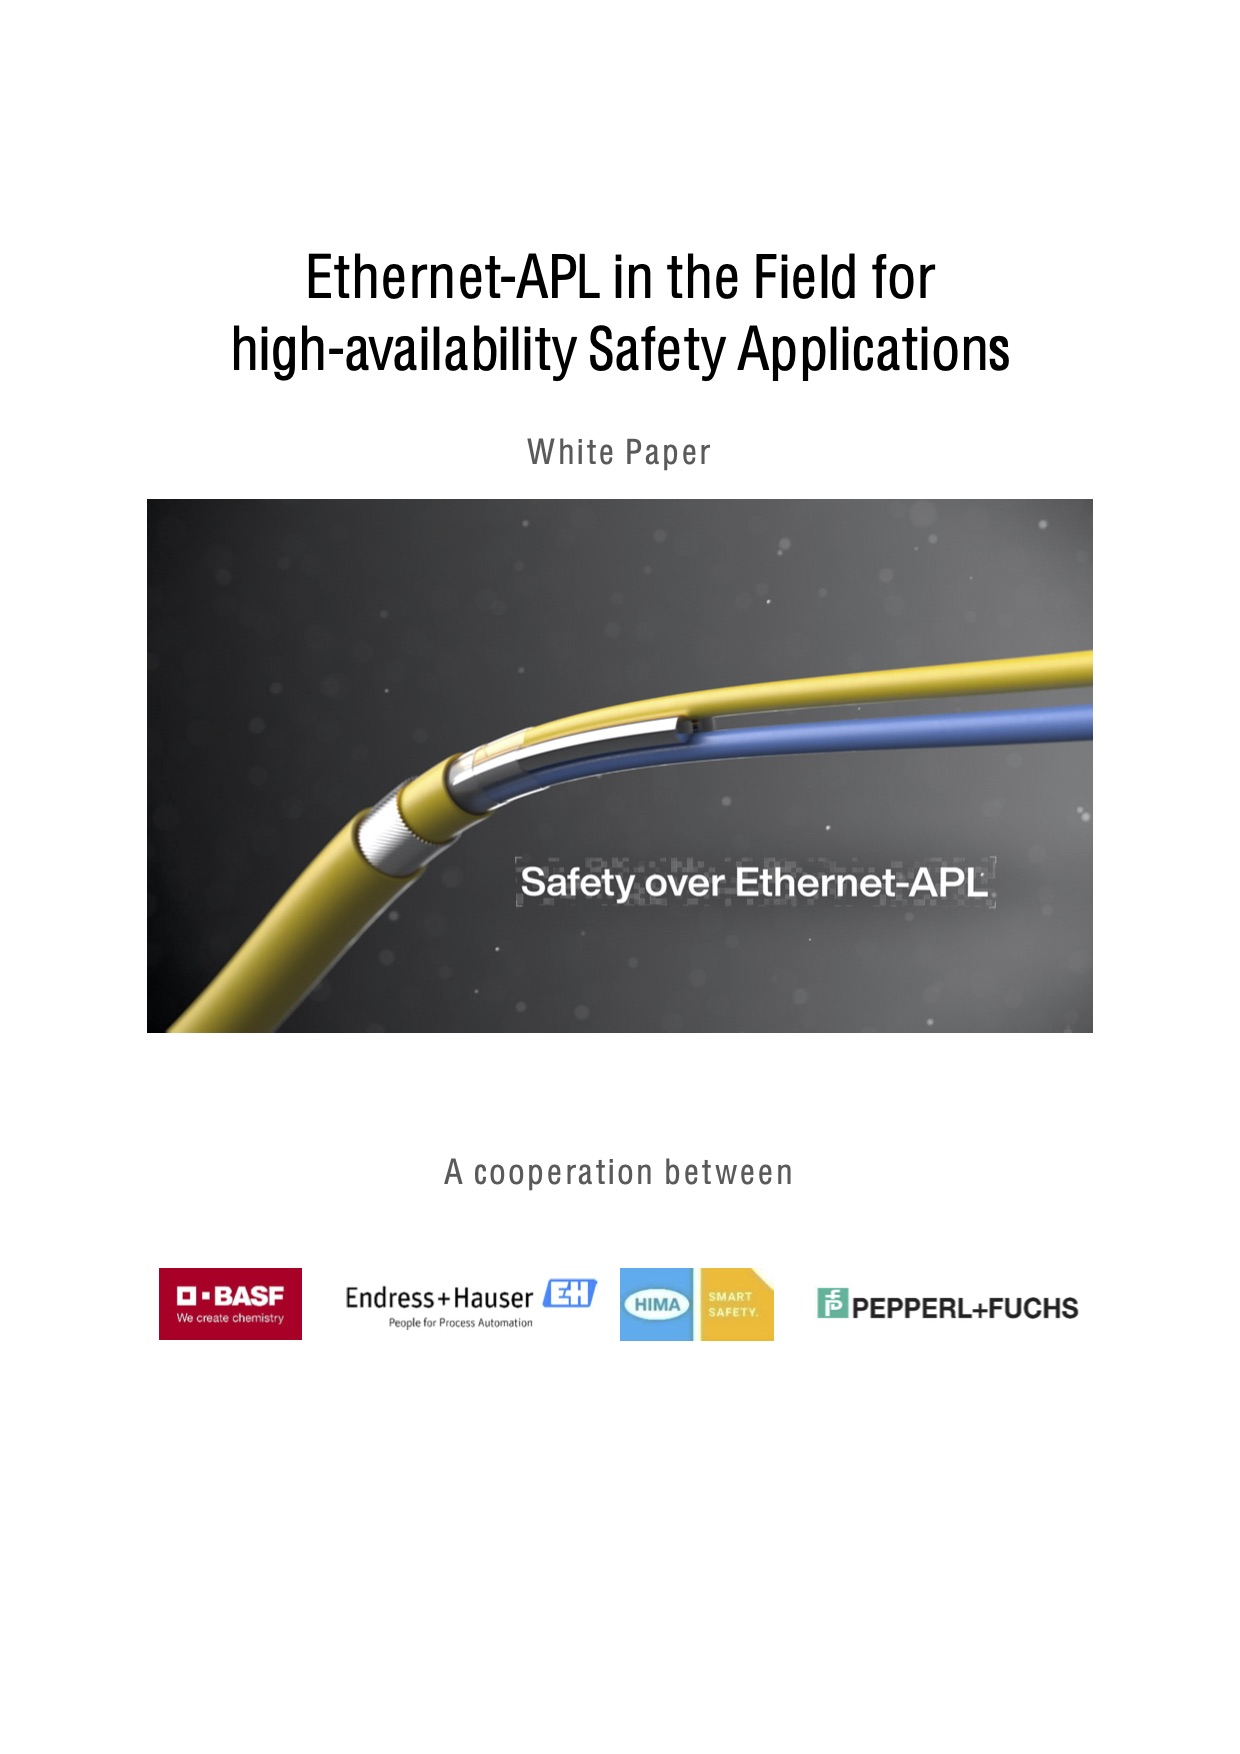 Ethernet-APL in the Field for High-availability Safety Applications